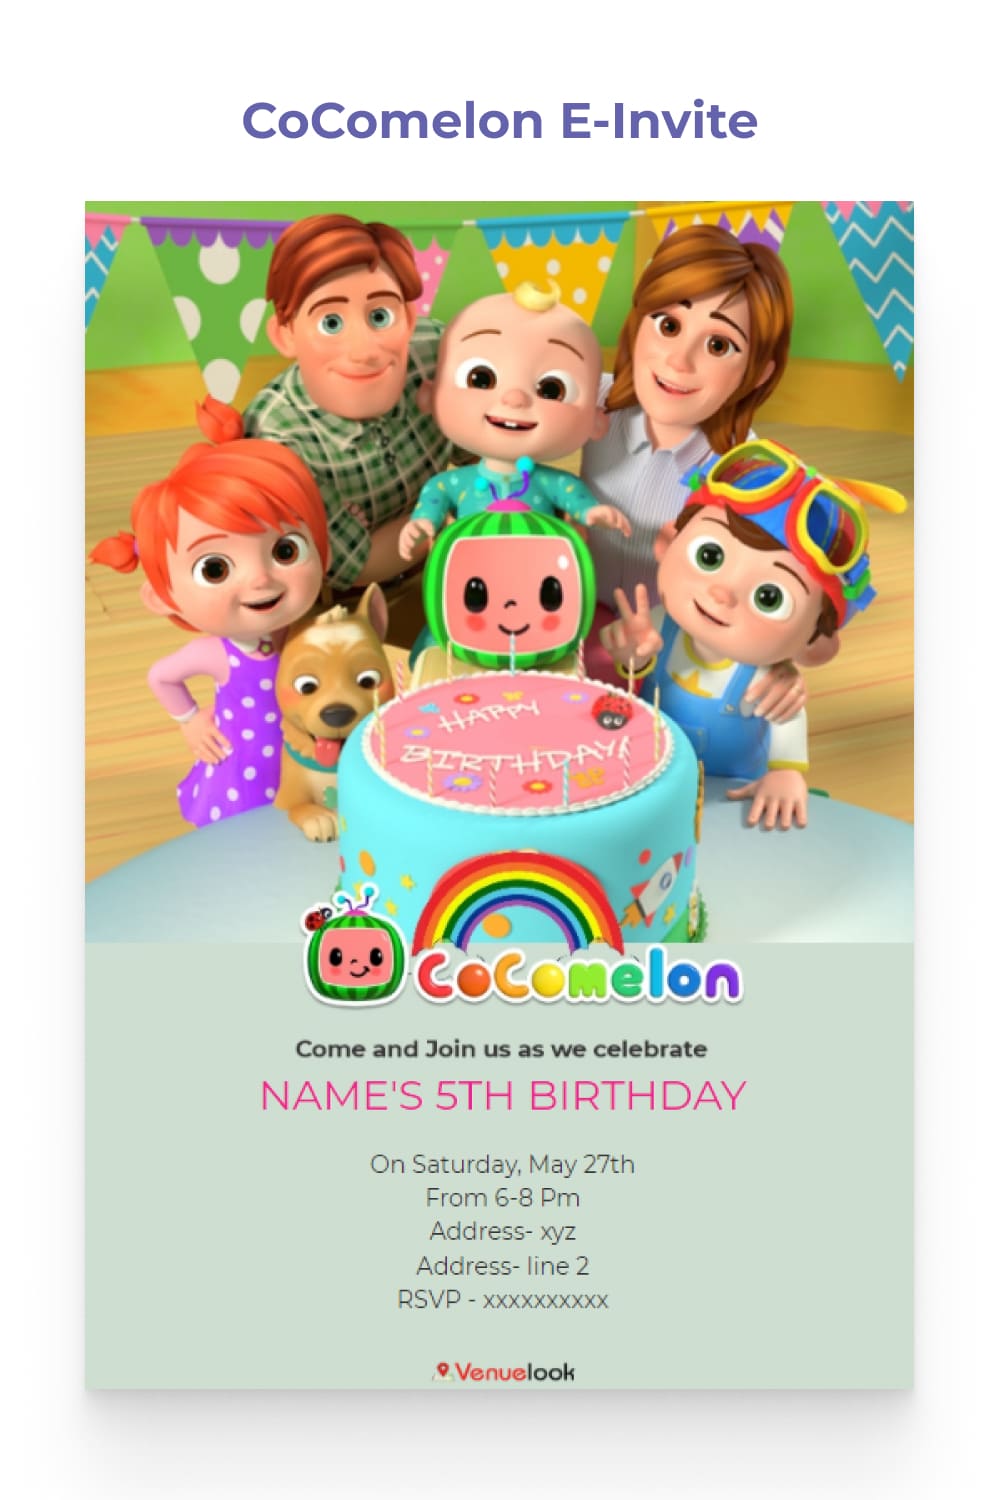 Birthday invitation with drawings of Cocomelon characters.